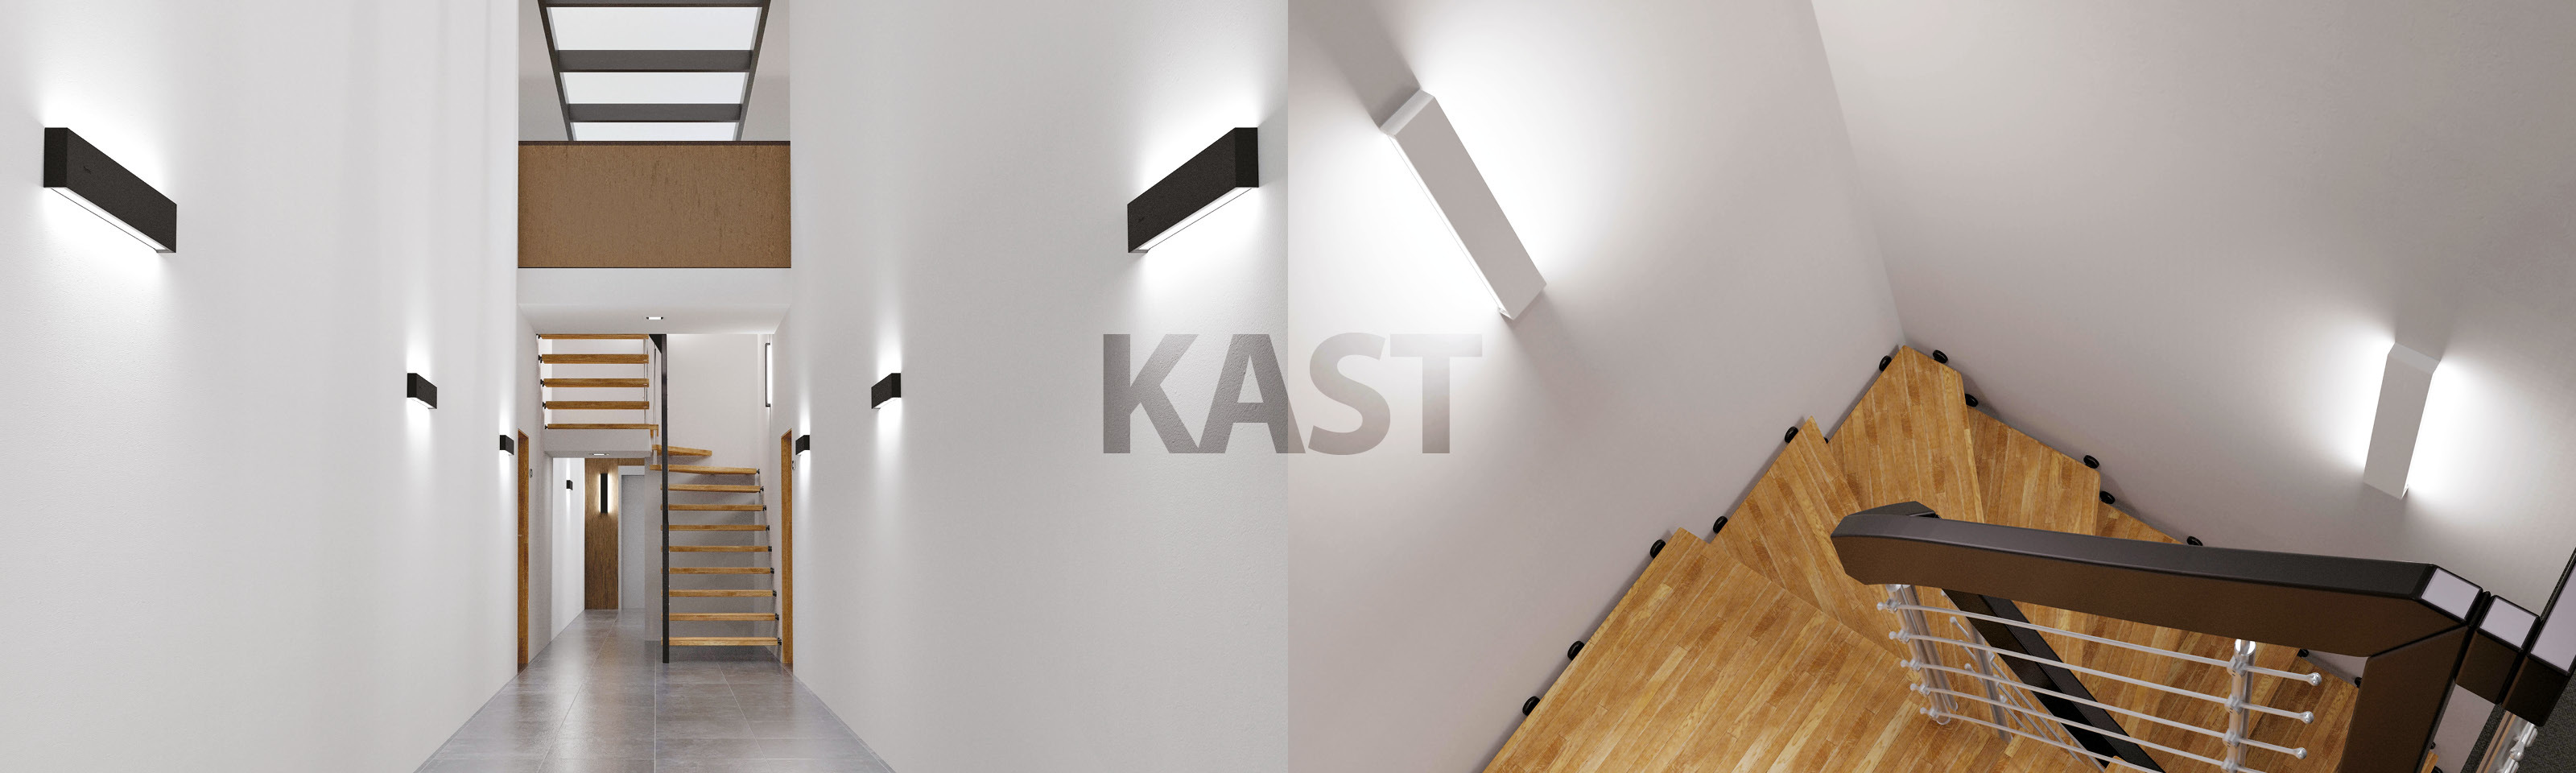 Kast - Wall mounted Up and Downlighter Luminaires